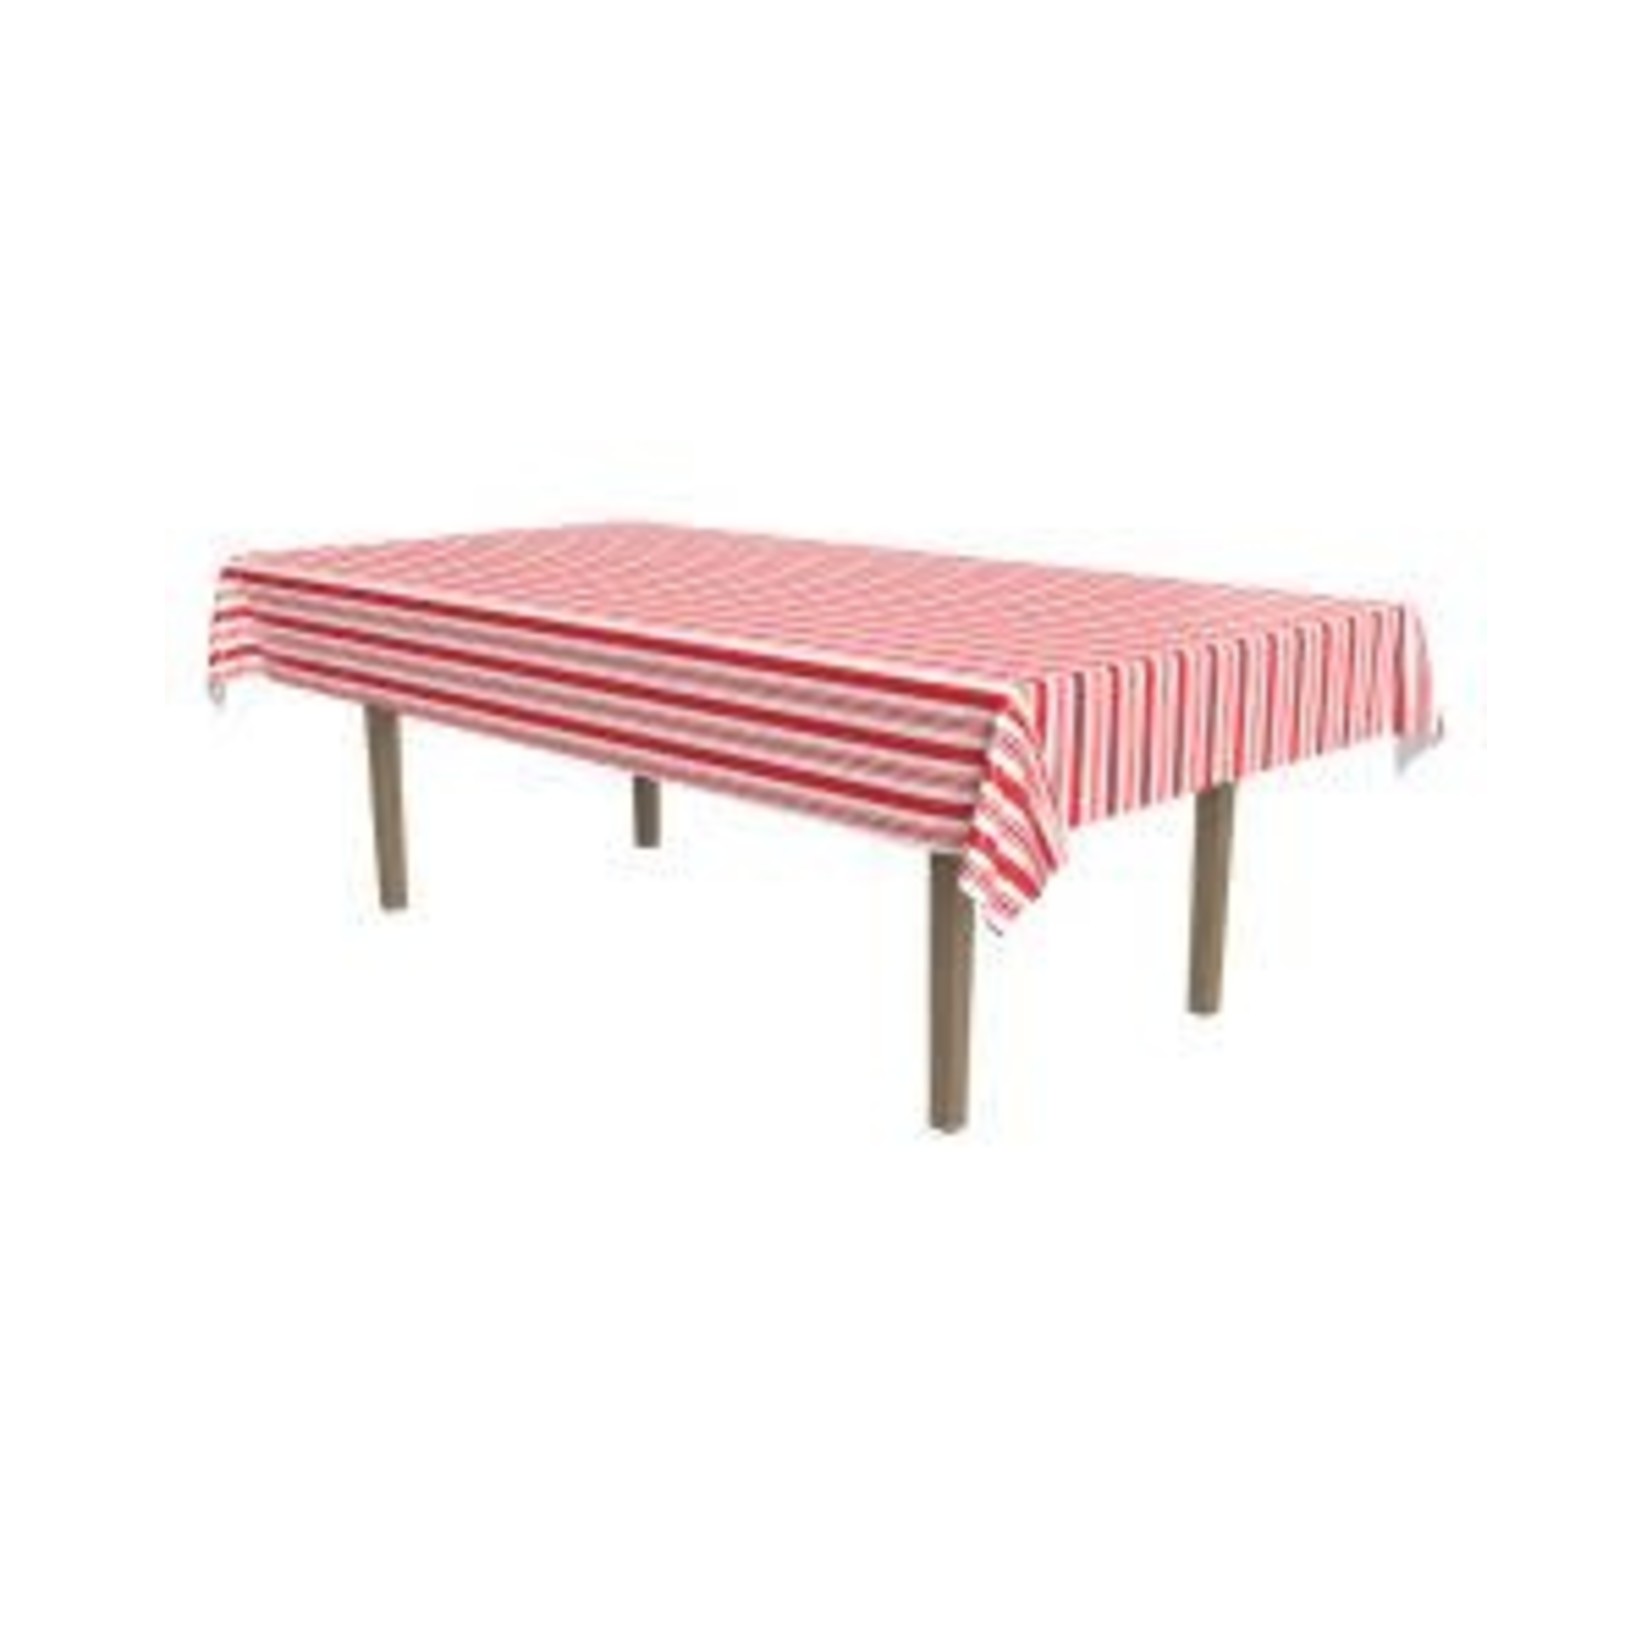 Beistle Red & White Striped Table Cover - 54" x 108"